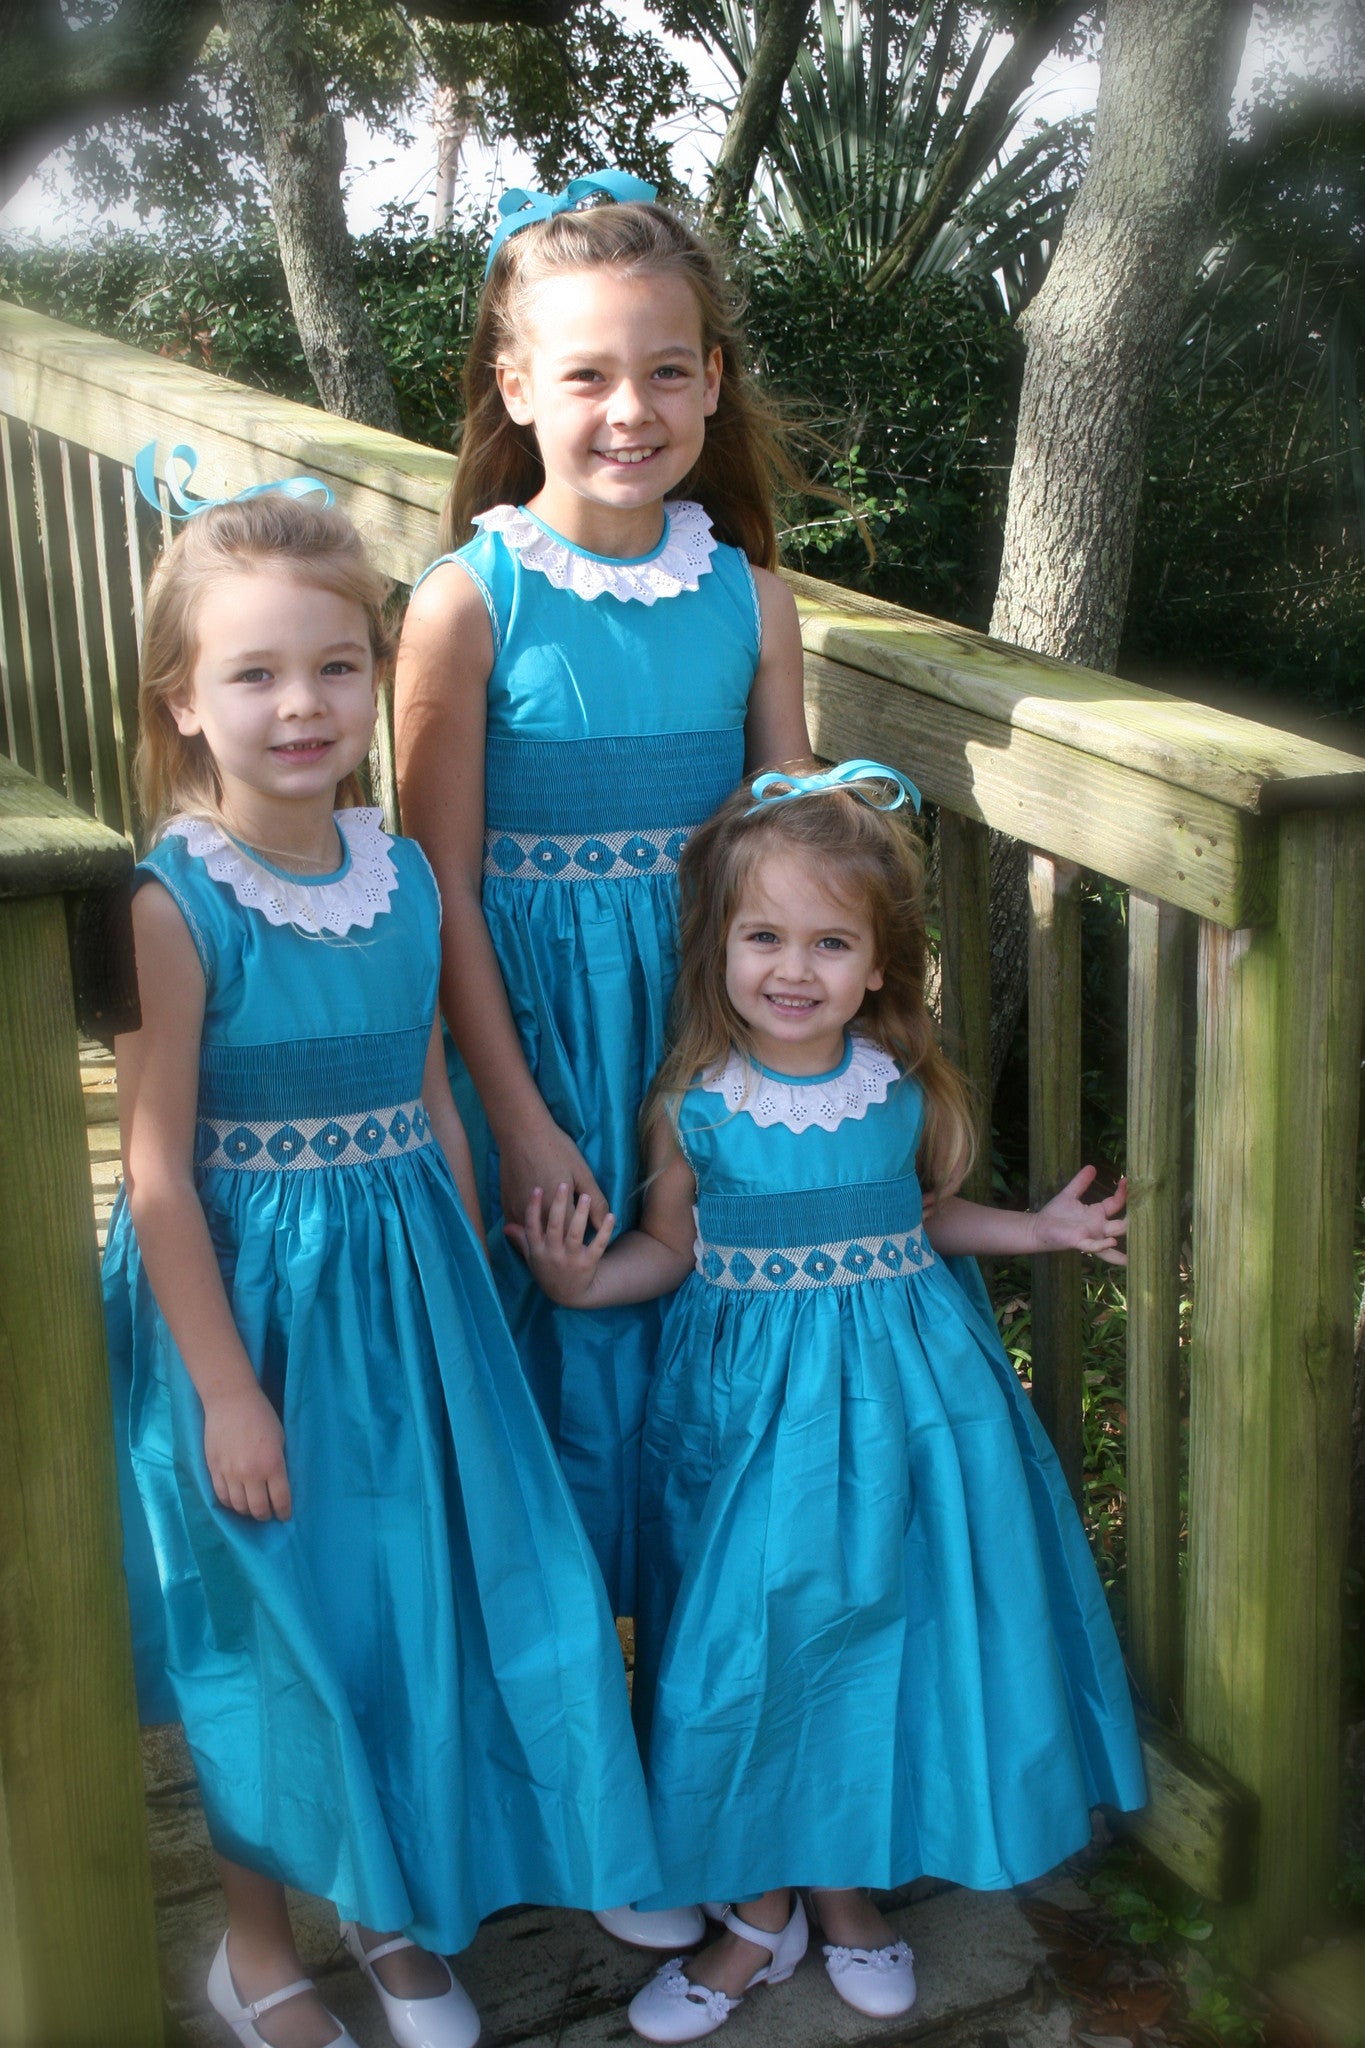 Heirloom Girls Silk Smocked Dress in Turquoise and Lace Size 6/7